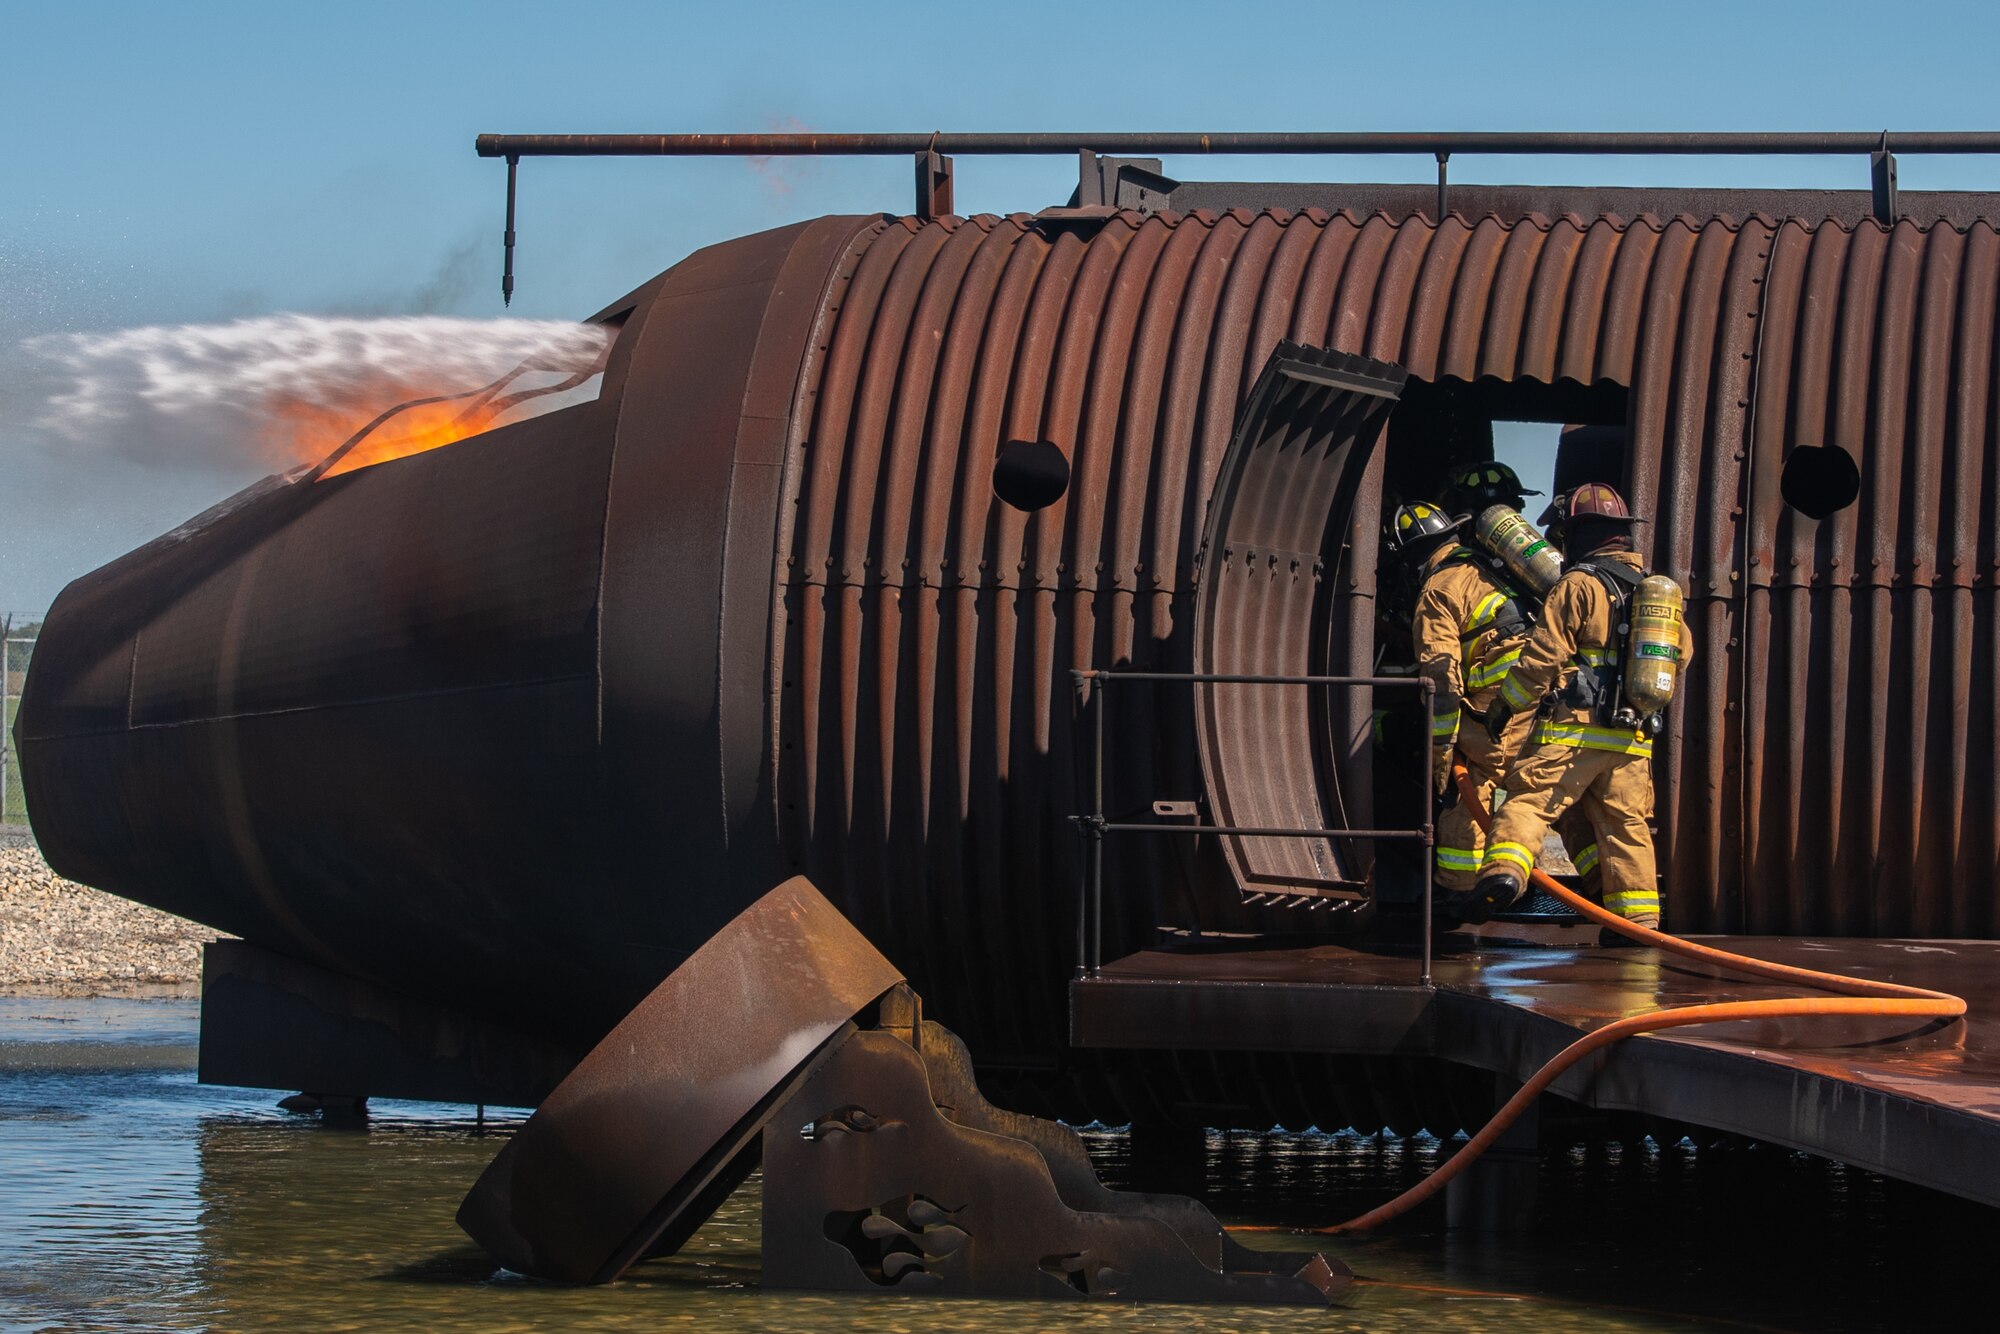 Firefighters from the 436th Civil Engineer Squadron and 177th Fighter Wing extinguish flames inside an aircraft fire trainer at the aircraft-live-fire training structure, Sept. 22, 2020, Dover Air Force Base, Delaware. Aircraft-live-fire training sessions are used to refresh proficiencies and satisfy other annual training requirements firefighters are required to complete. (U.S. Air Force photo by Airman Brandan Hollis)